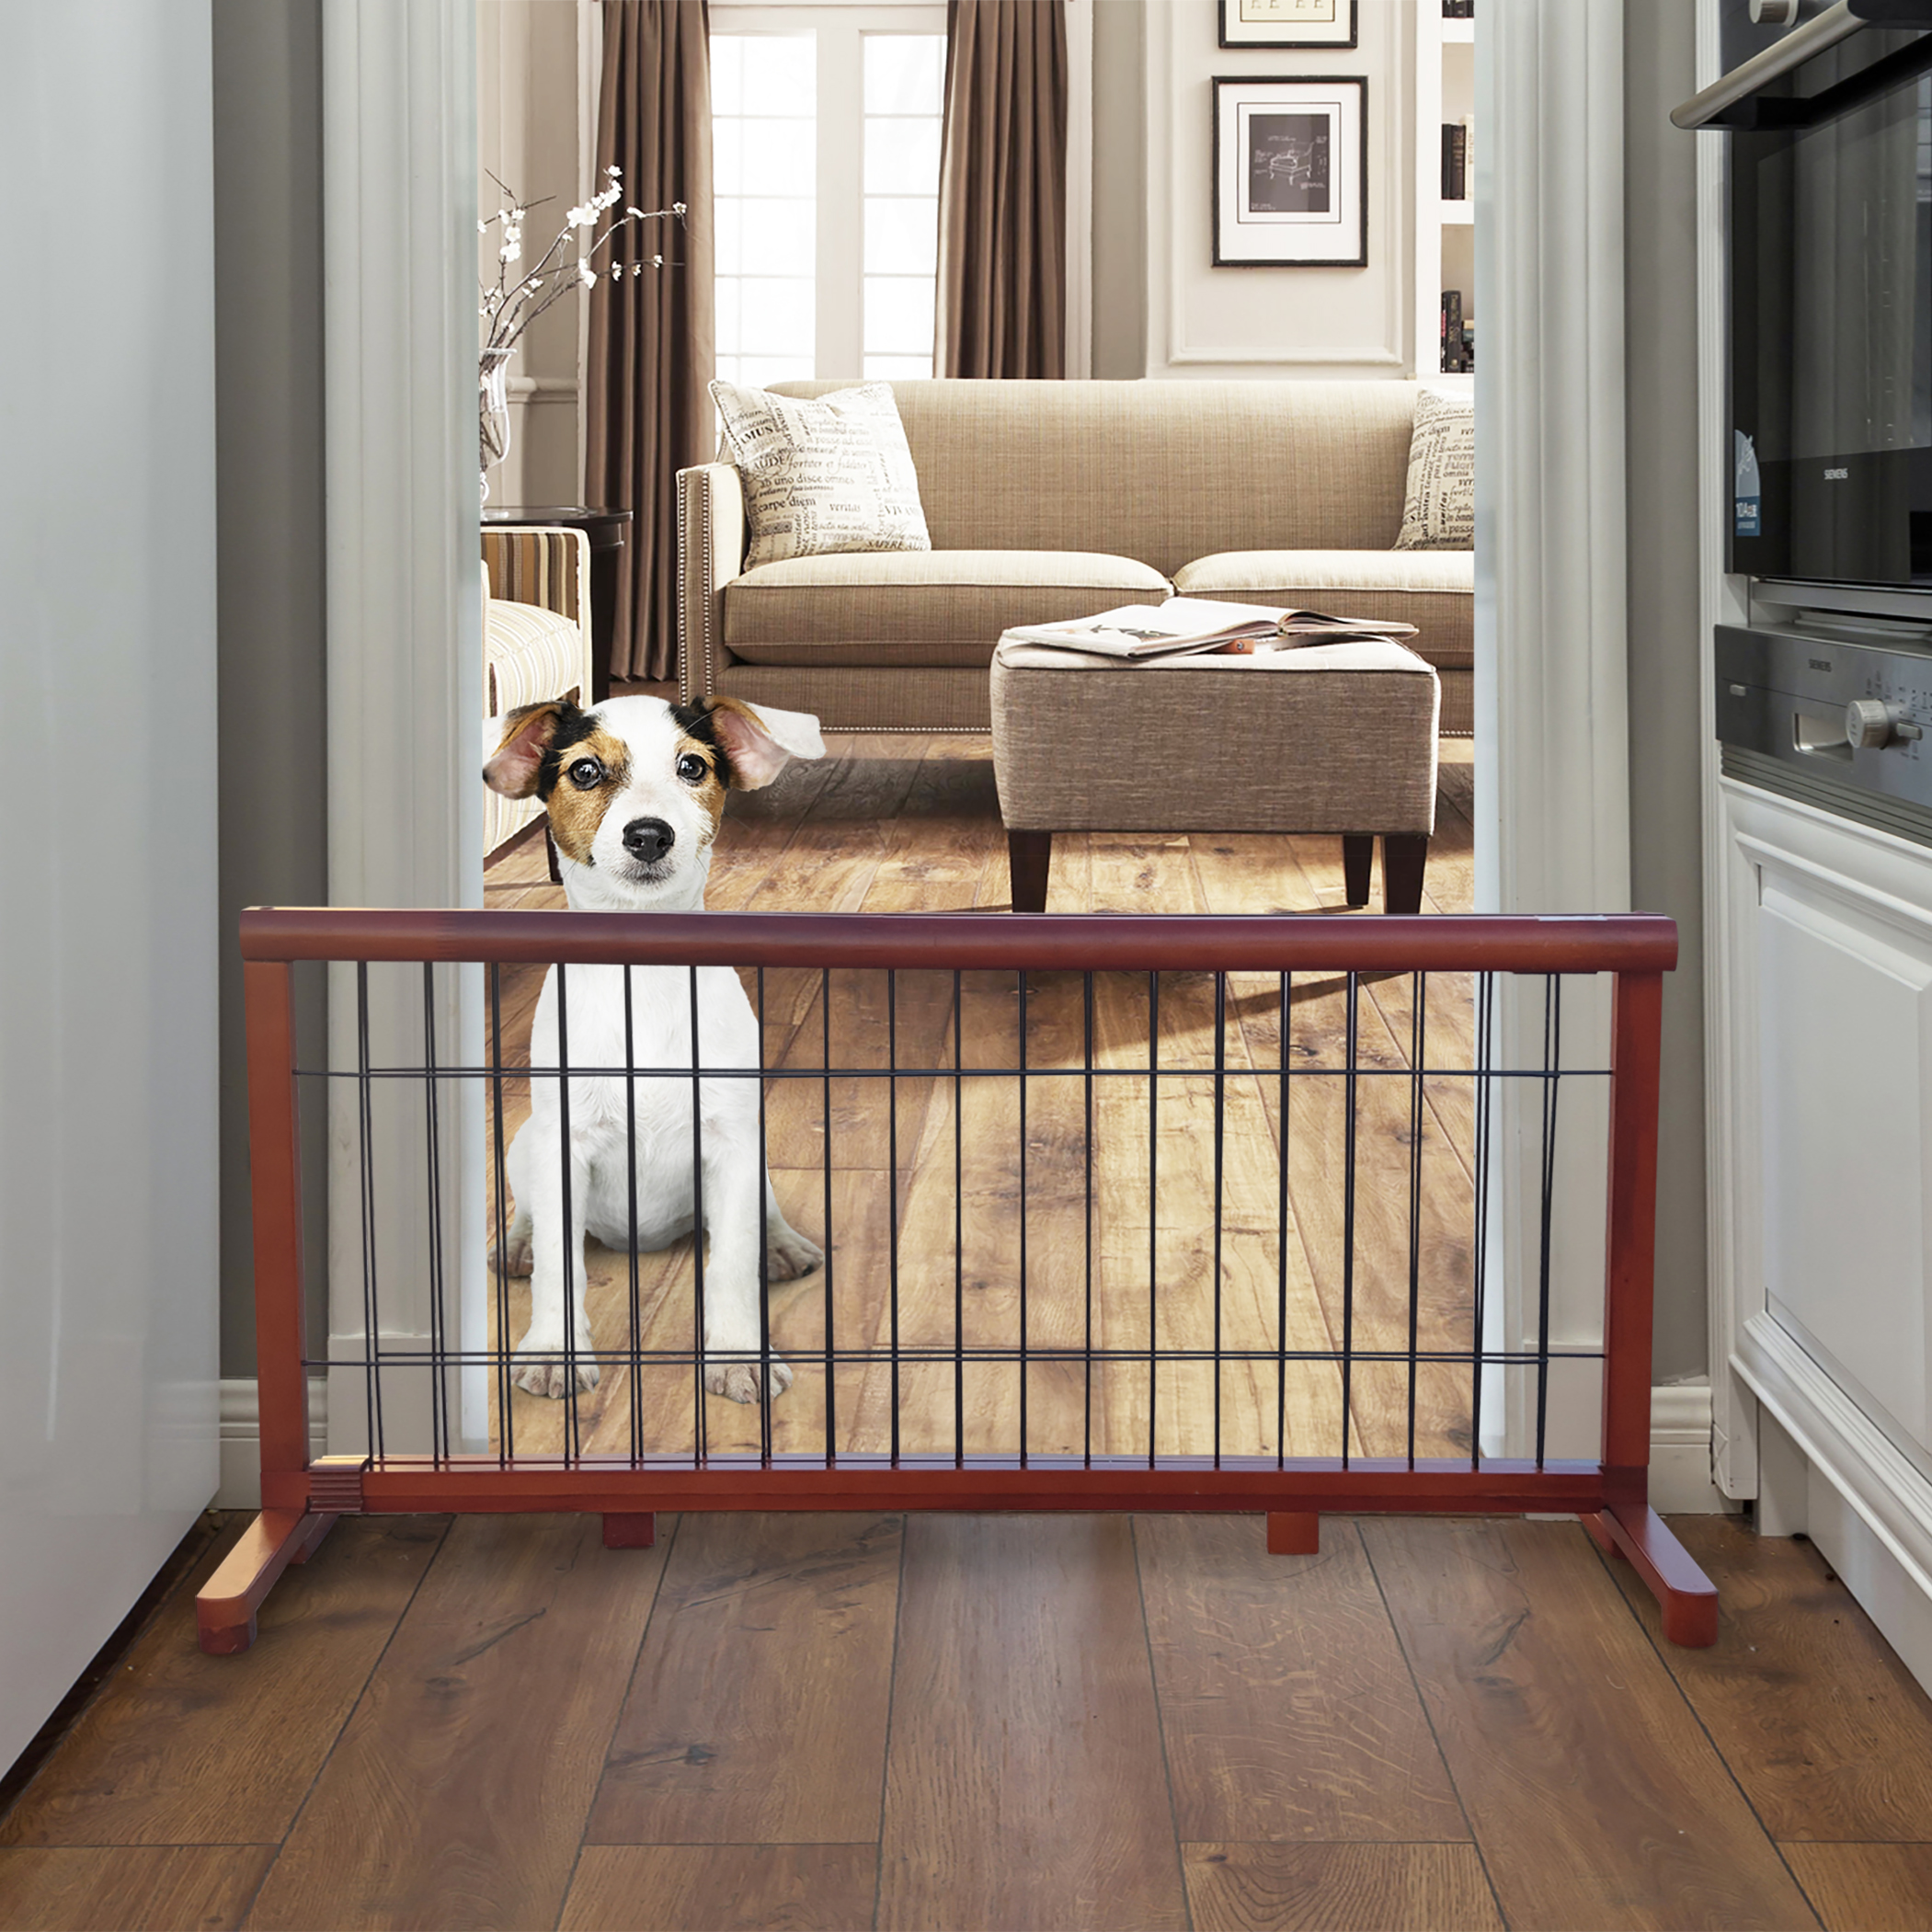 MAHOGANY Wooden Dog Gate, Free Standing Wire Mesh Pet Gate, Expandable